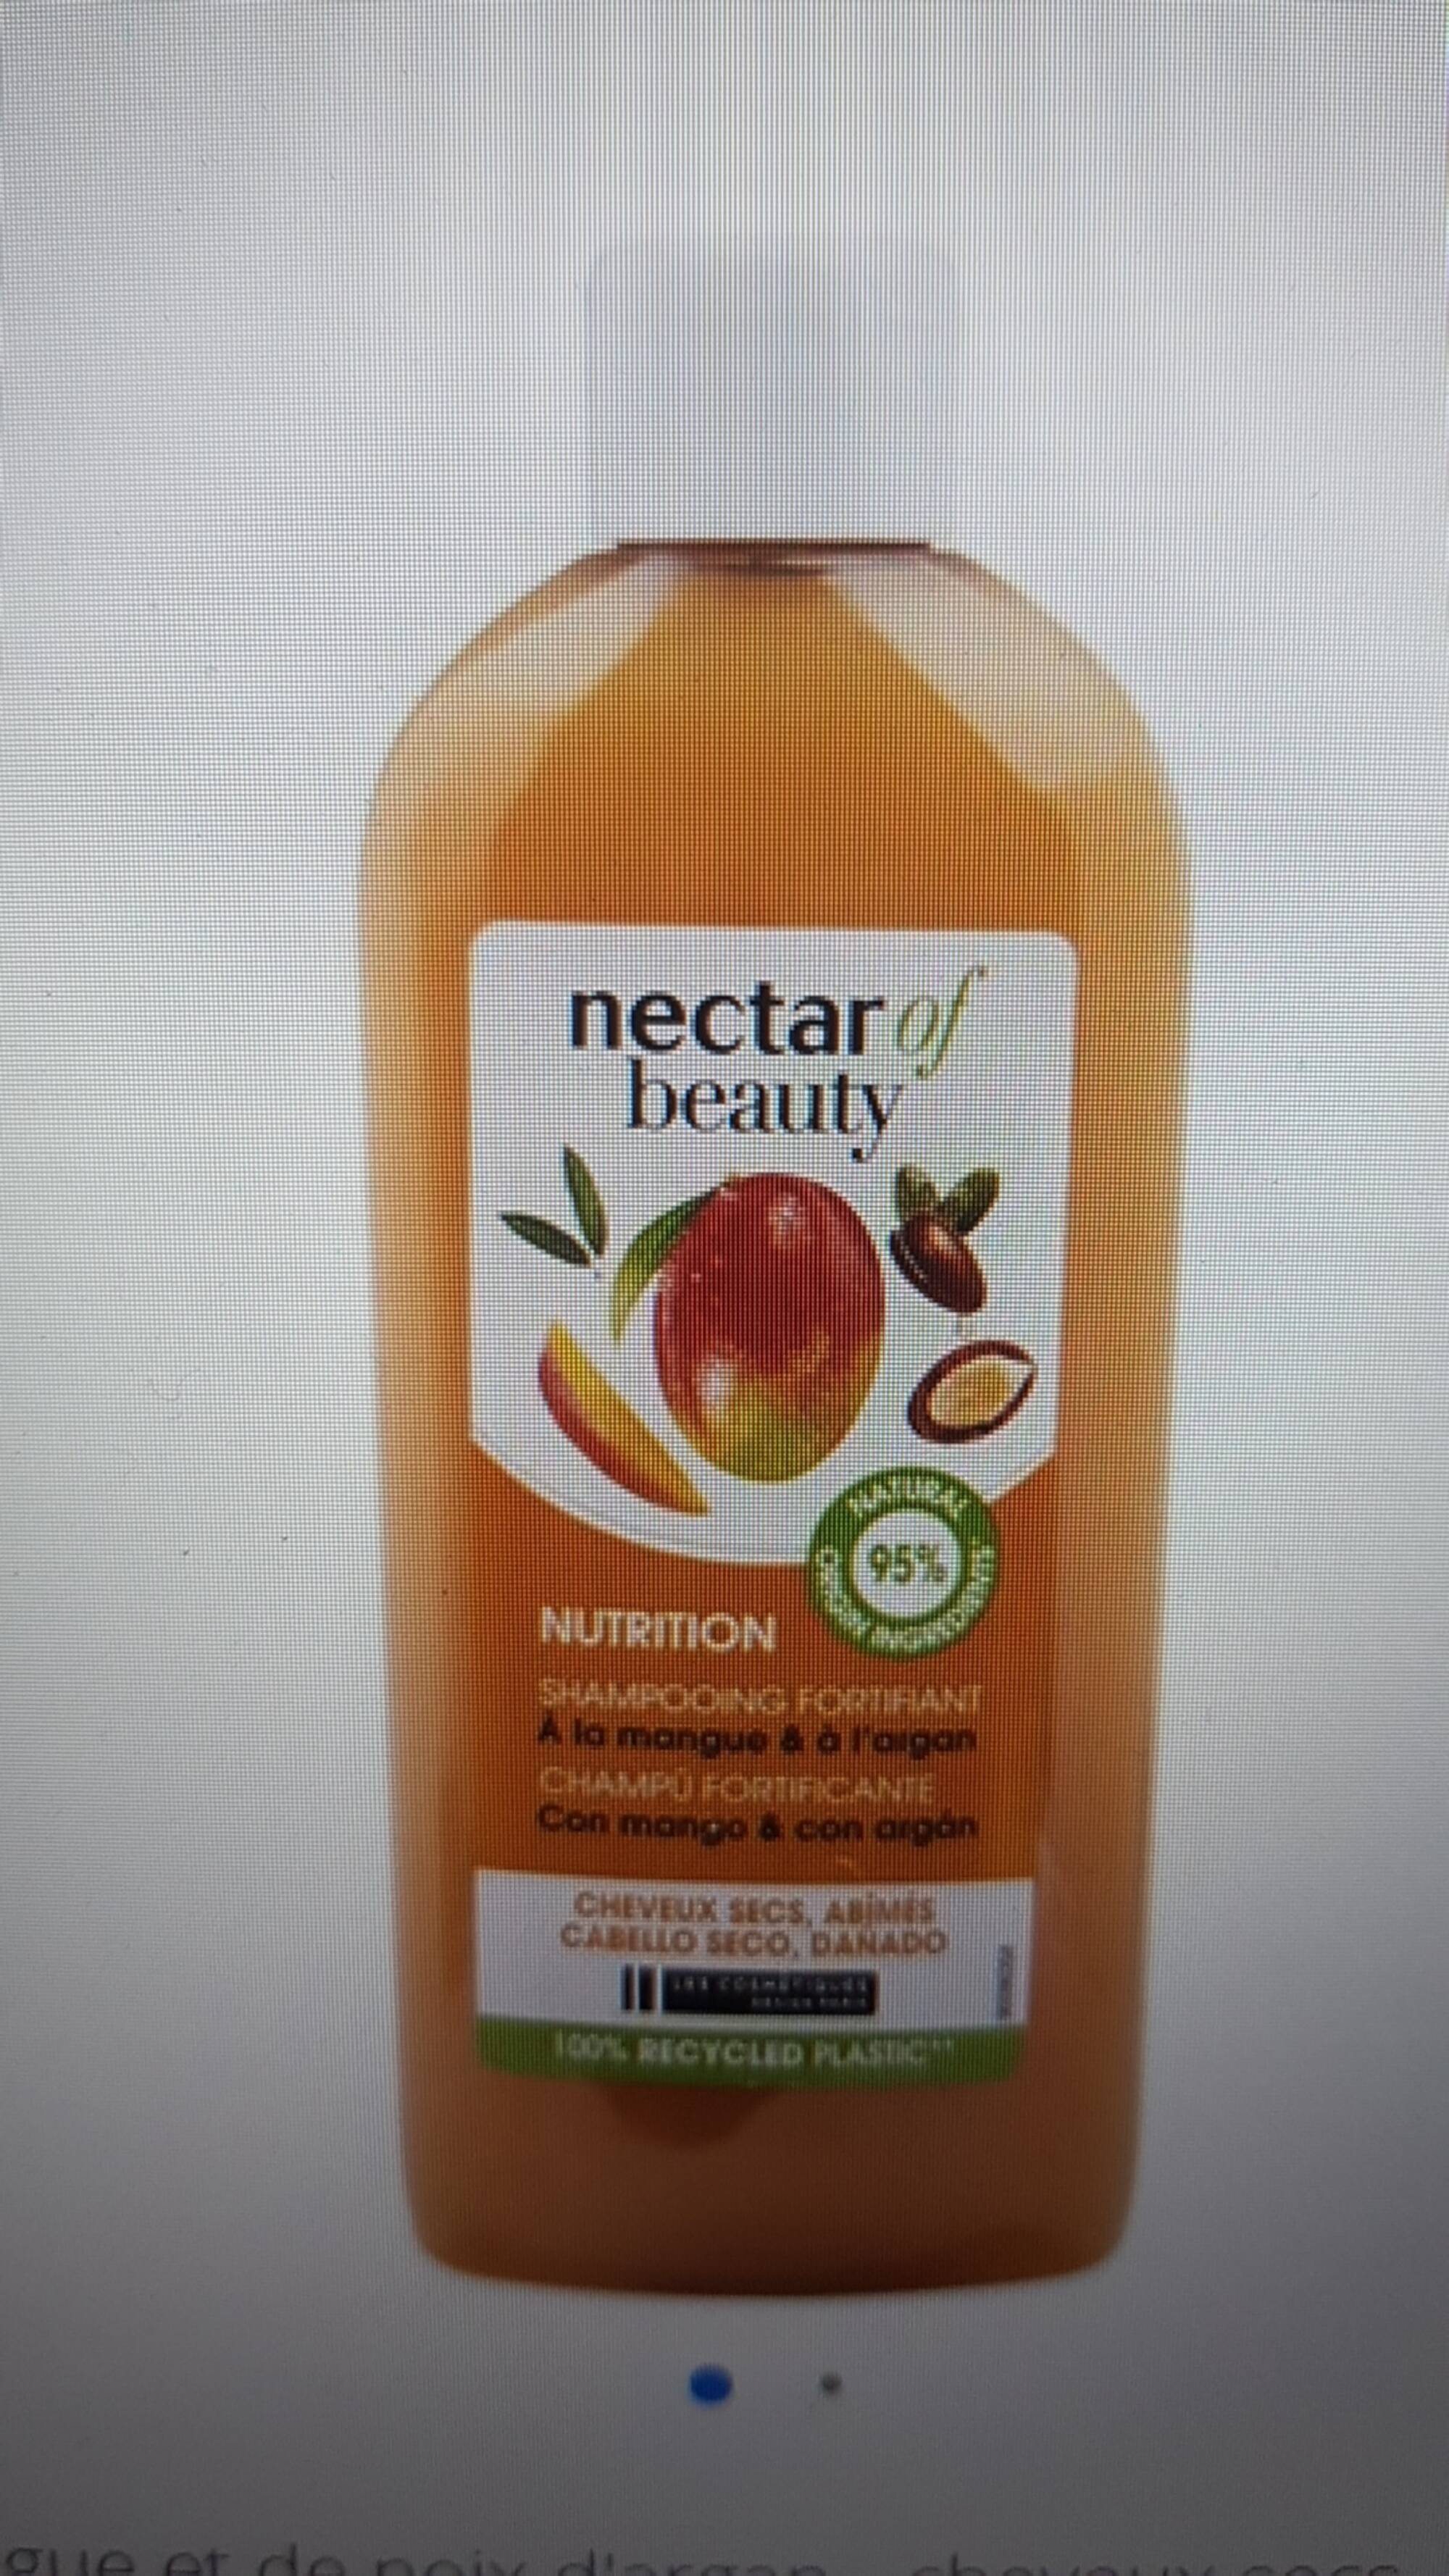 NECTAR OF BEAUTY - Nutrition - Shampoing fortifiant à la mangue